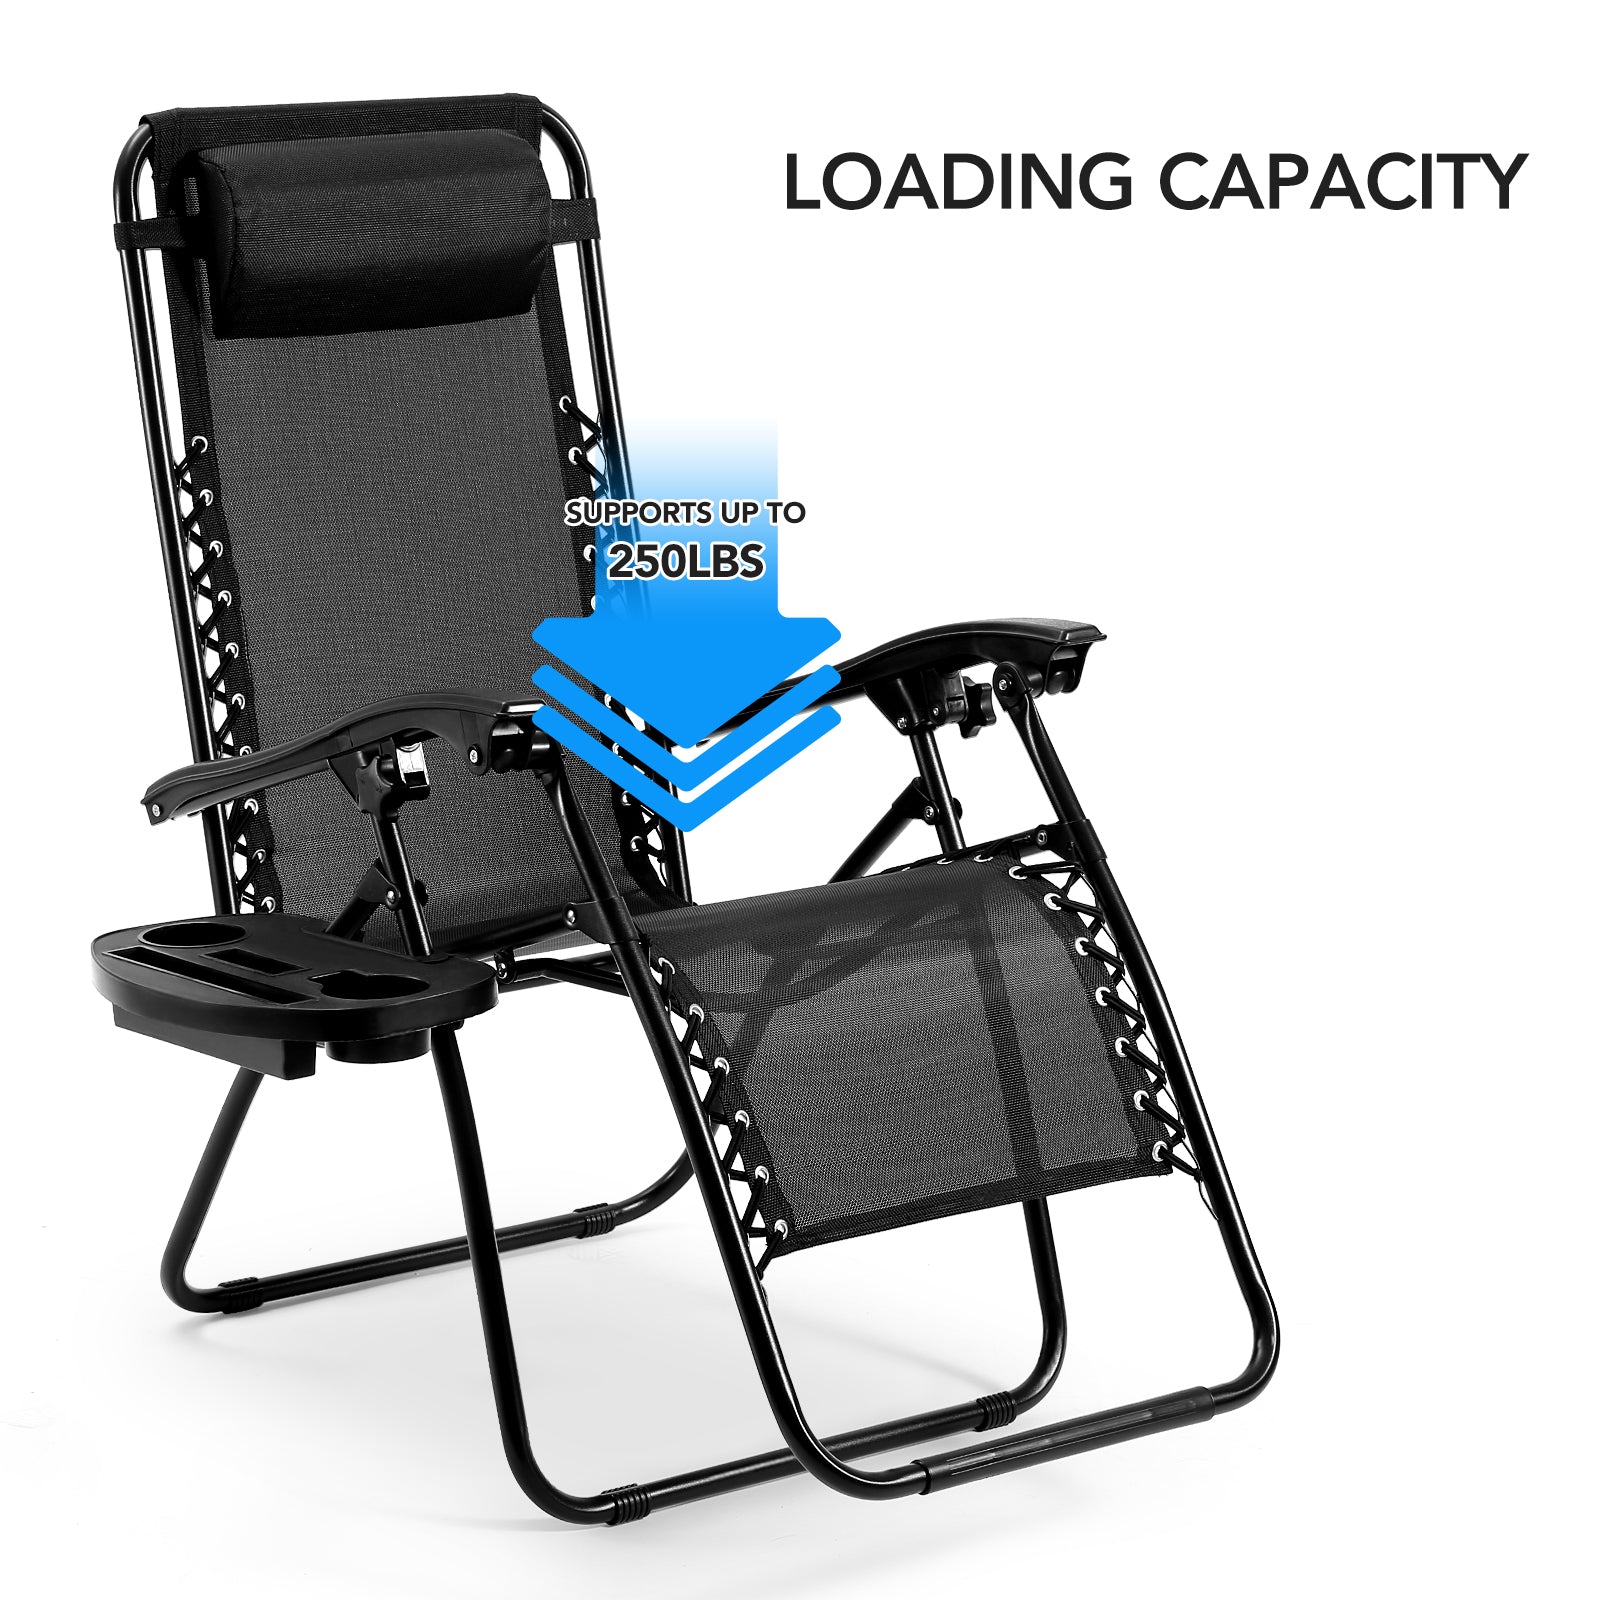 Load image into Gallery viewer, Zero Gravity Chairs Patio Chairs Set of 2 Reclining Beach Chair Adjustable Steel Mesh Zero Gravity Lounge Chair Recliners w/Pillows and Cup Holder Trays for Poolside, Backyard, Beach, Camping
